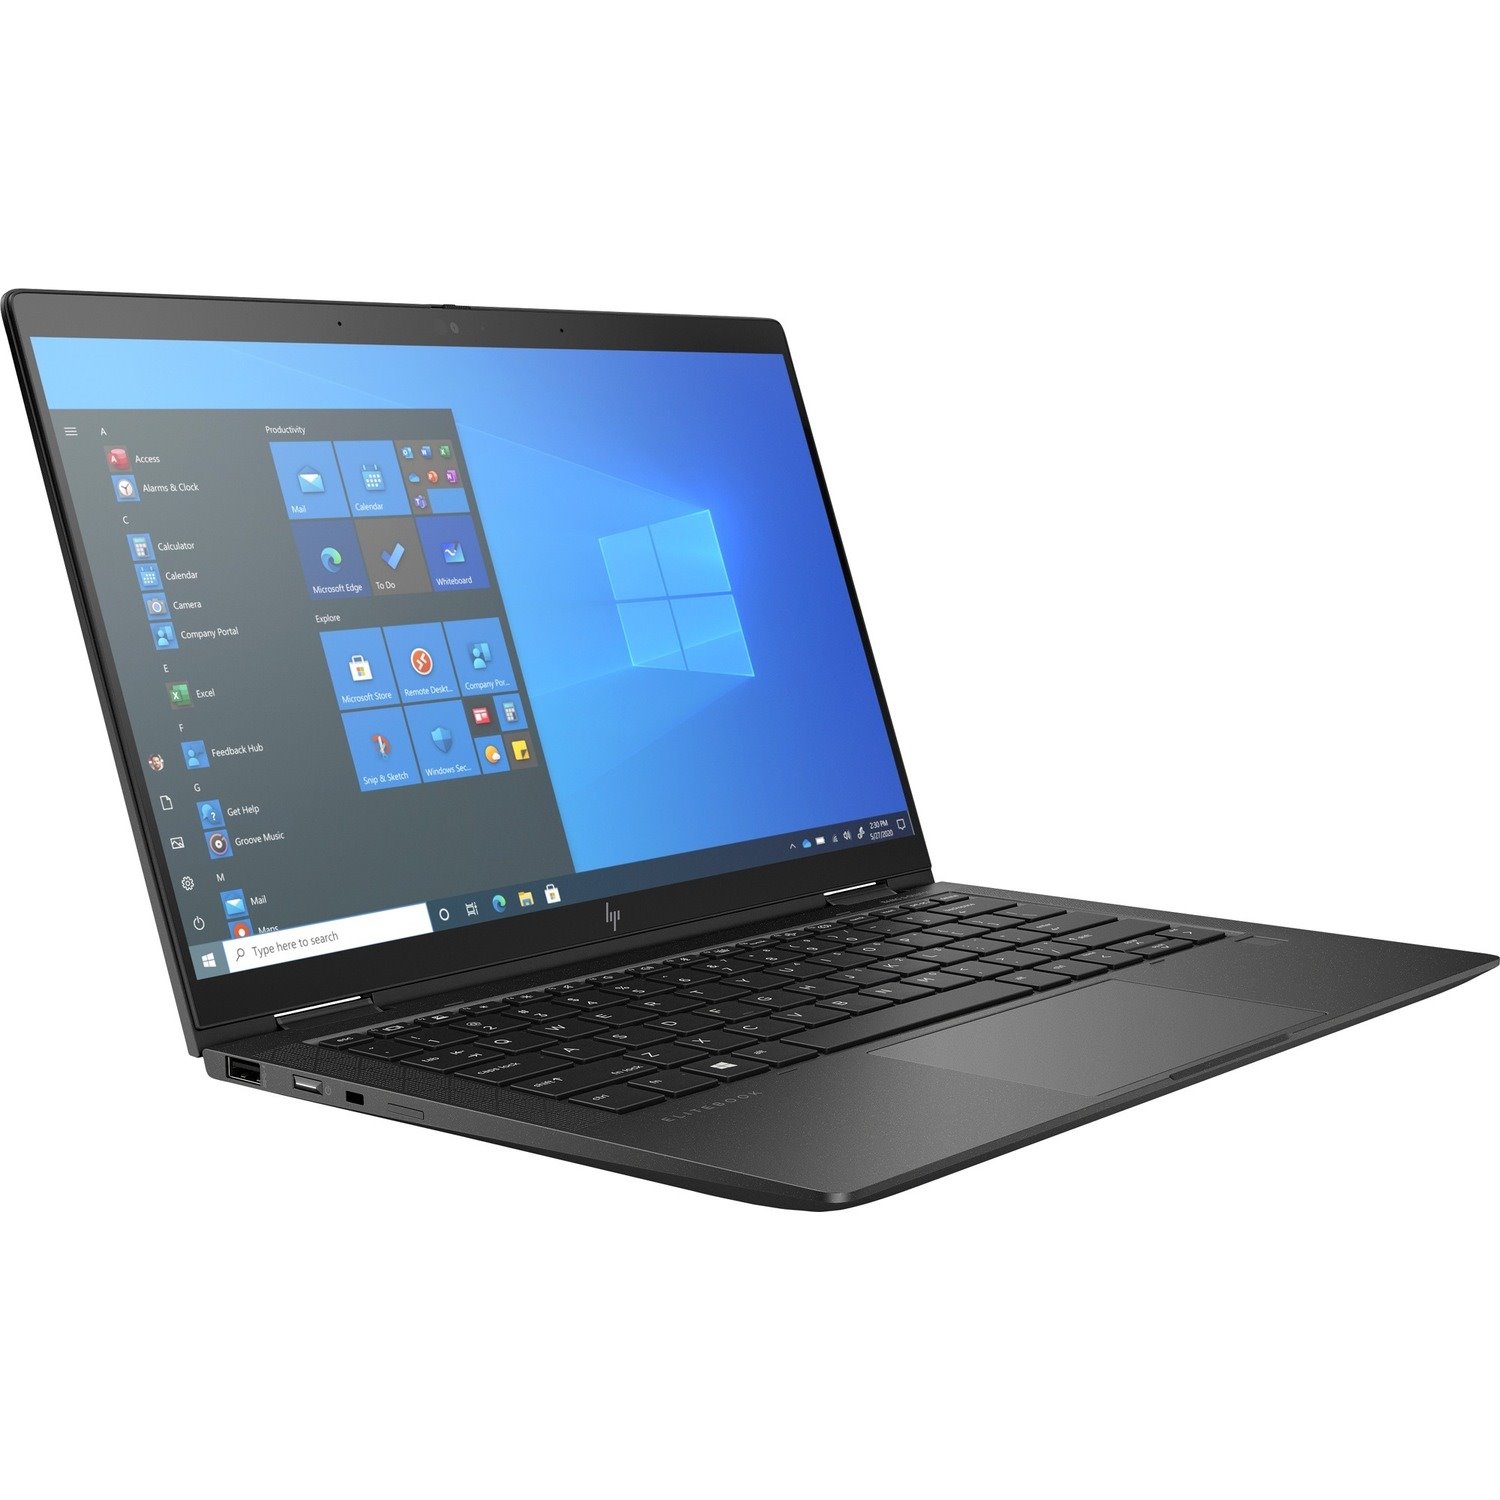 HP Elite Dragonfly Max 13.3" Touchscreen Convertible 2 in 1 Notebook - Full HD - Intel Core i7 11th Gen i7-1185G7 - 16 GB - 512 GB SSD